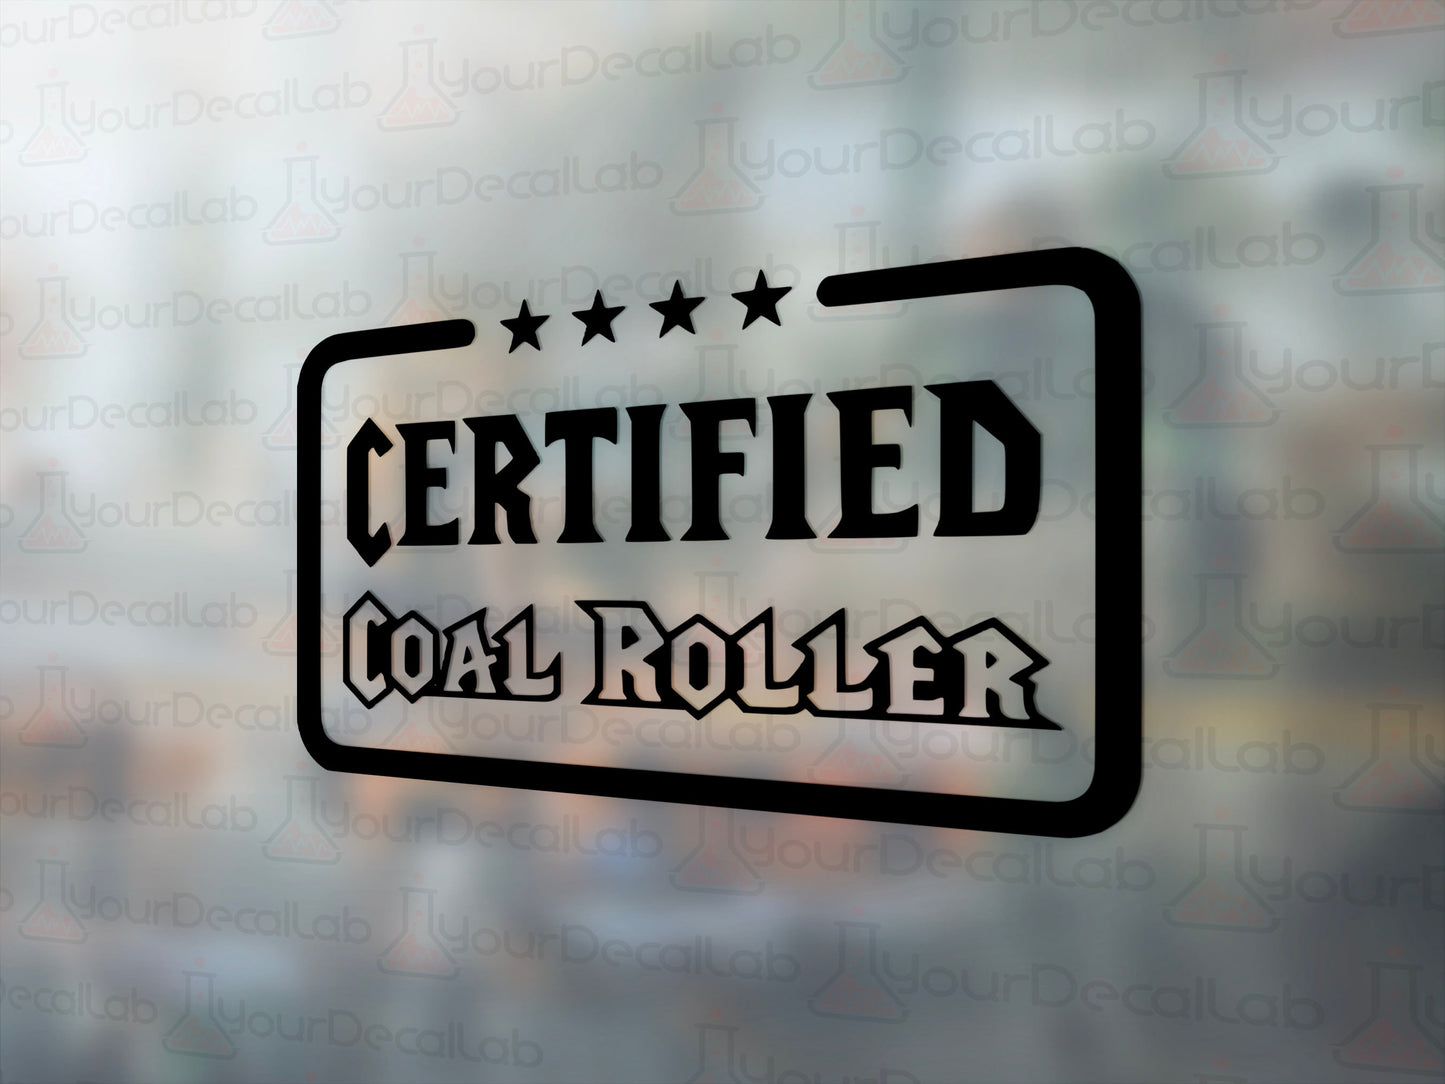 Certified Coal Roller Decal - Many Colors & Sizes